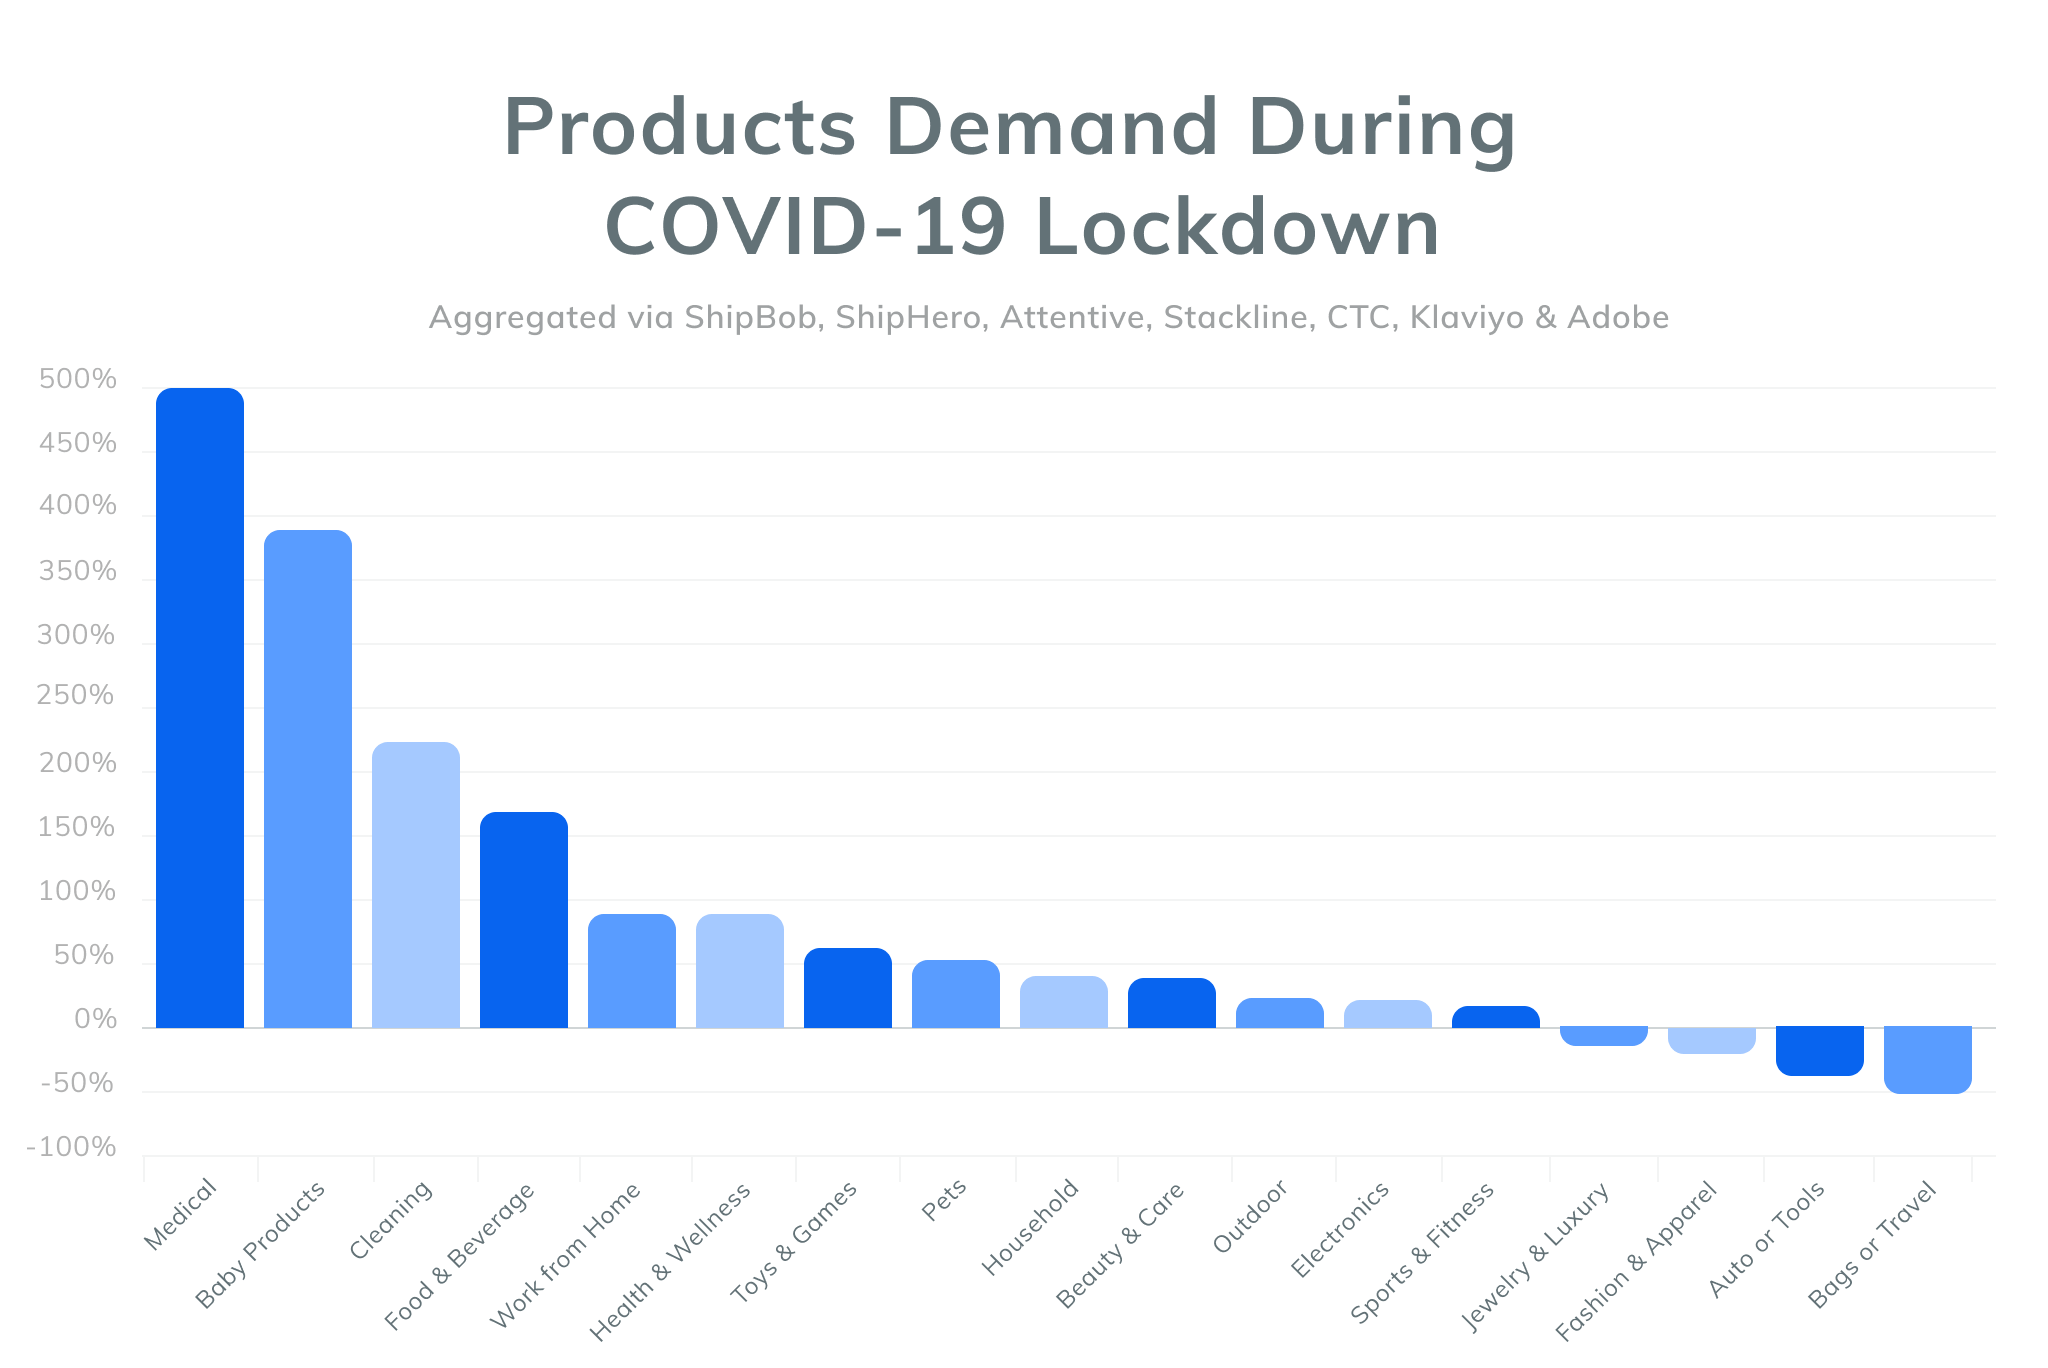 Products Demand During COVID-19 Lockdown